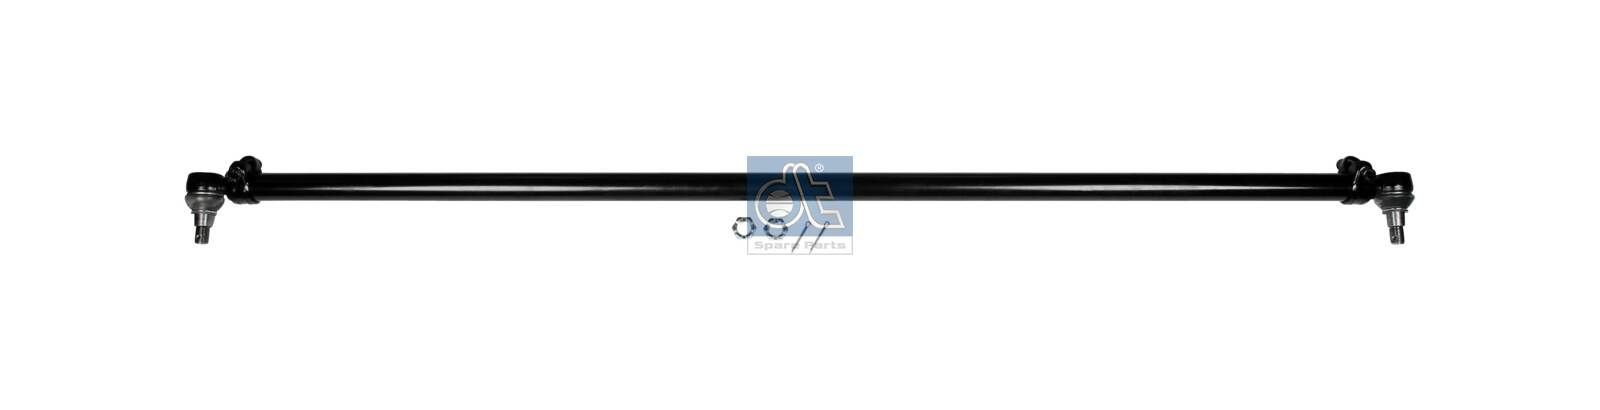 DT Spare Parts 5.22004 Rod Assembly 1353 391